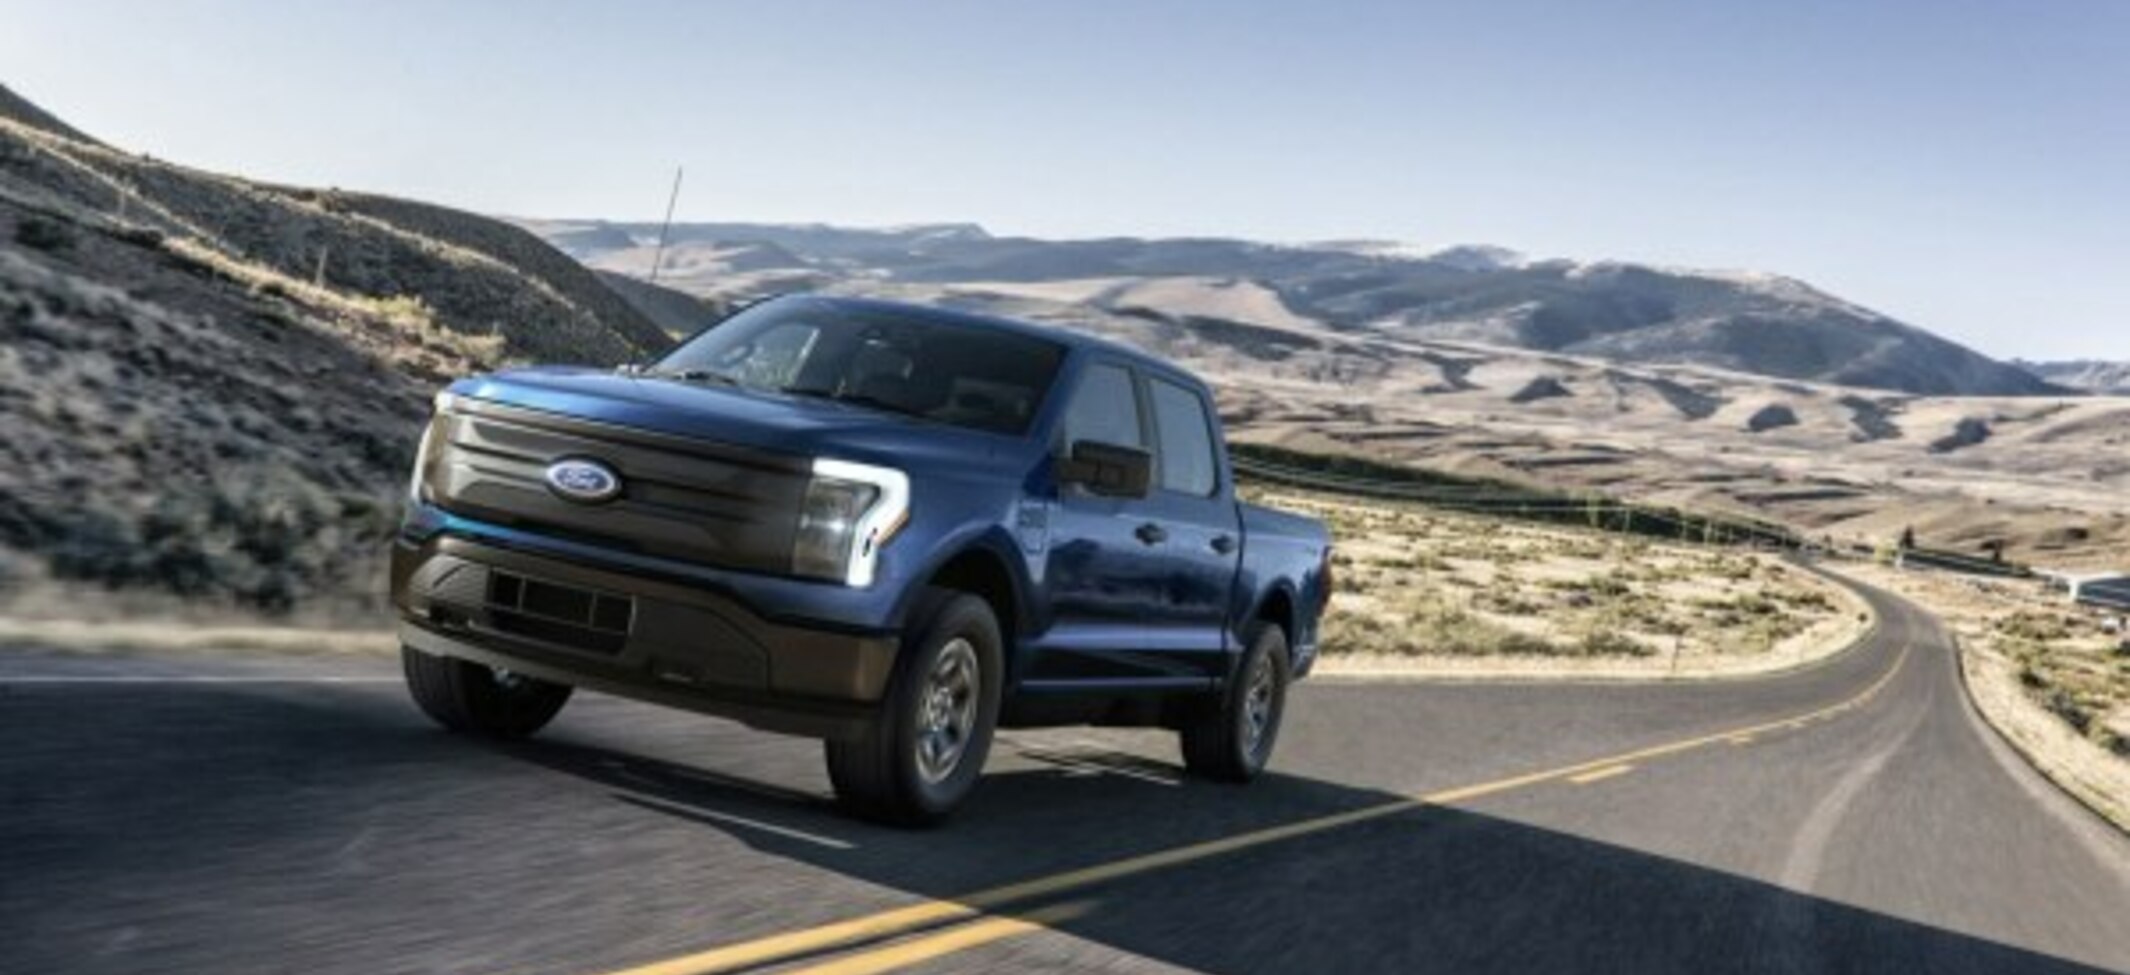 Ford F-Series F-150 Lightning XIV SuperCrew Extended Range 131 kWh (563 Hp) 4WD 2021, 2022